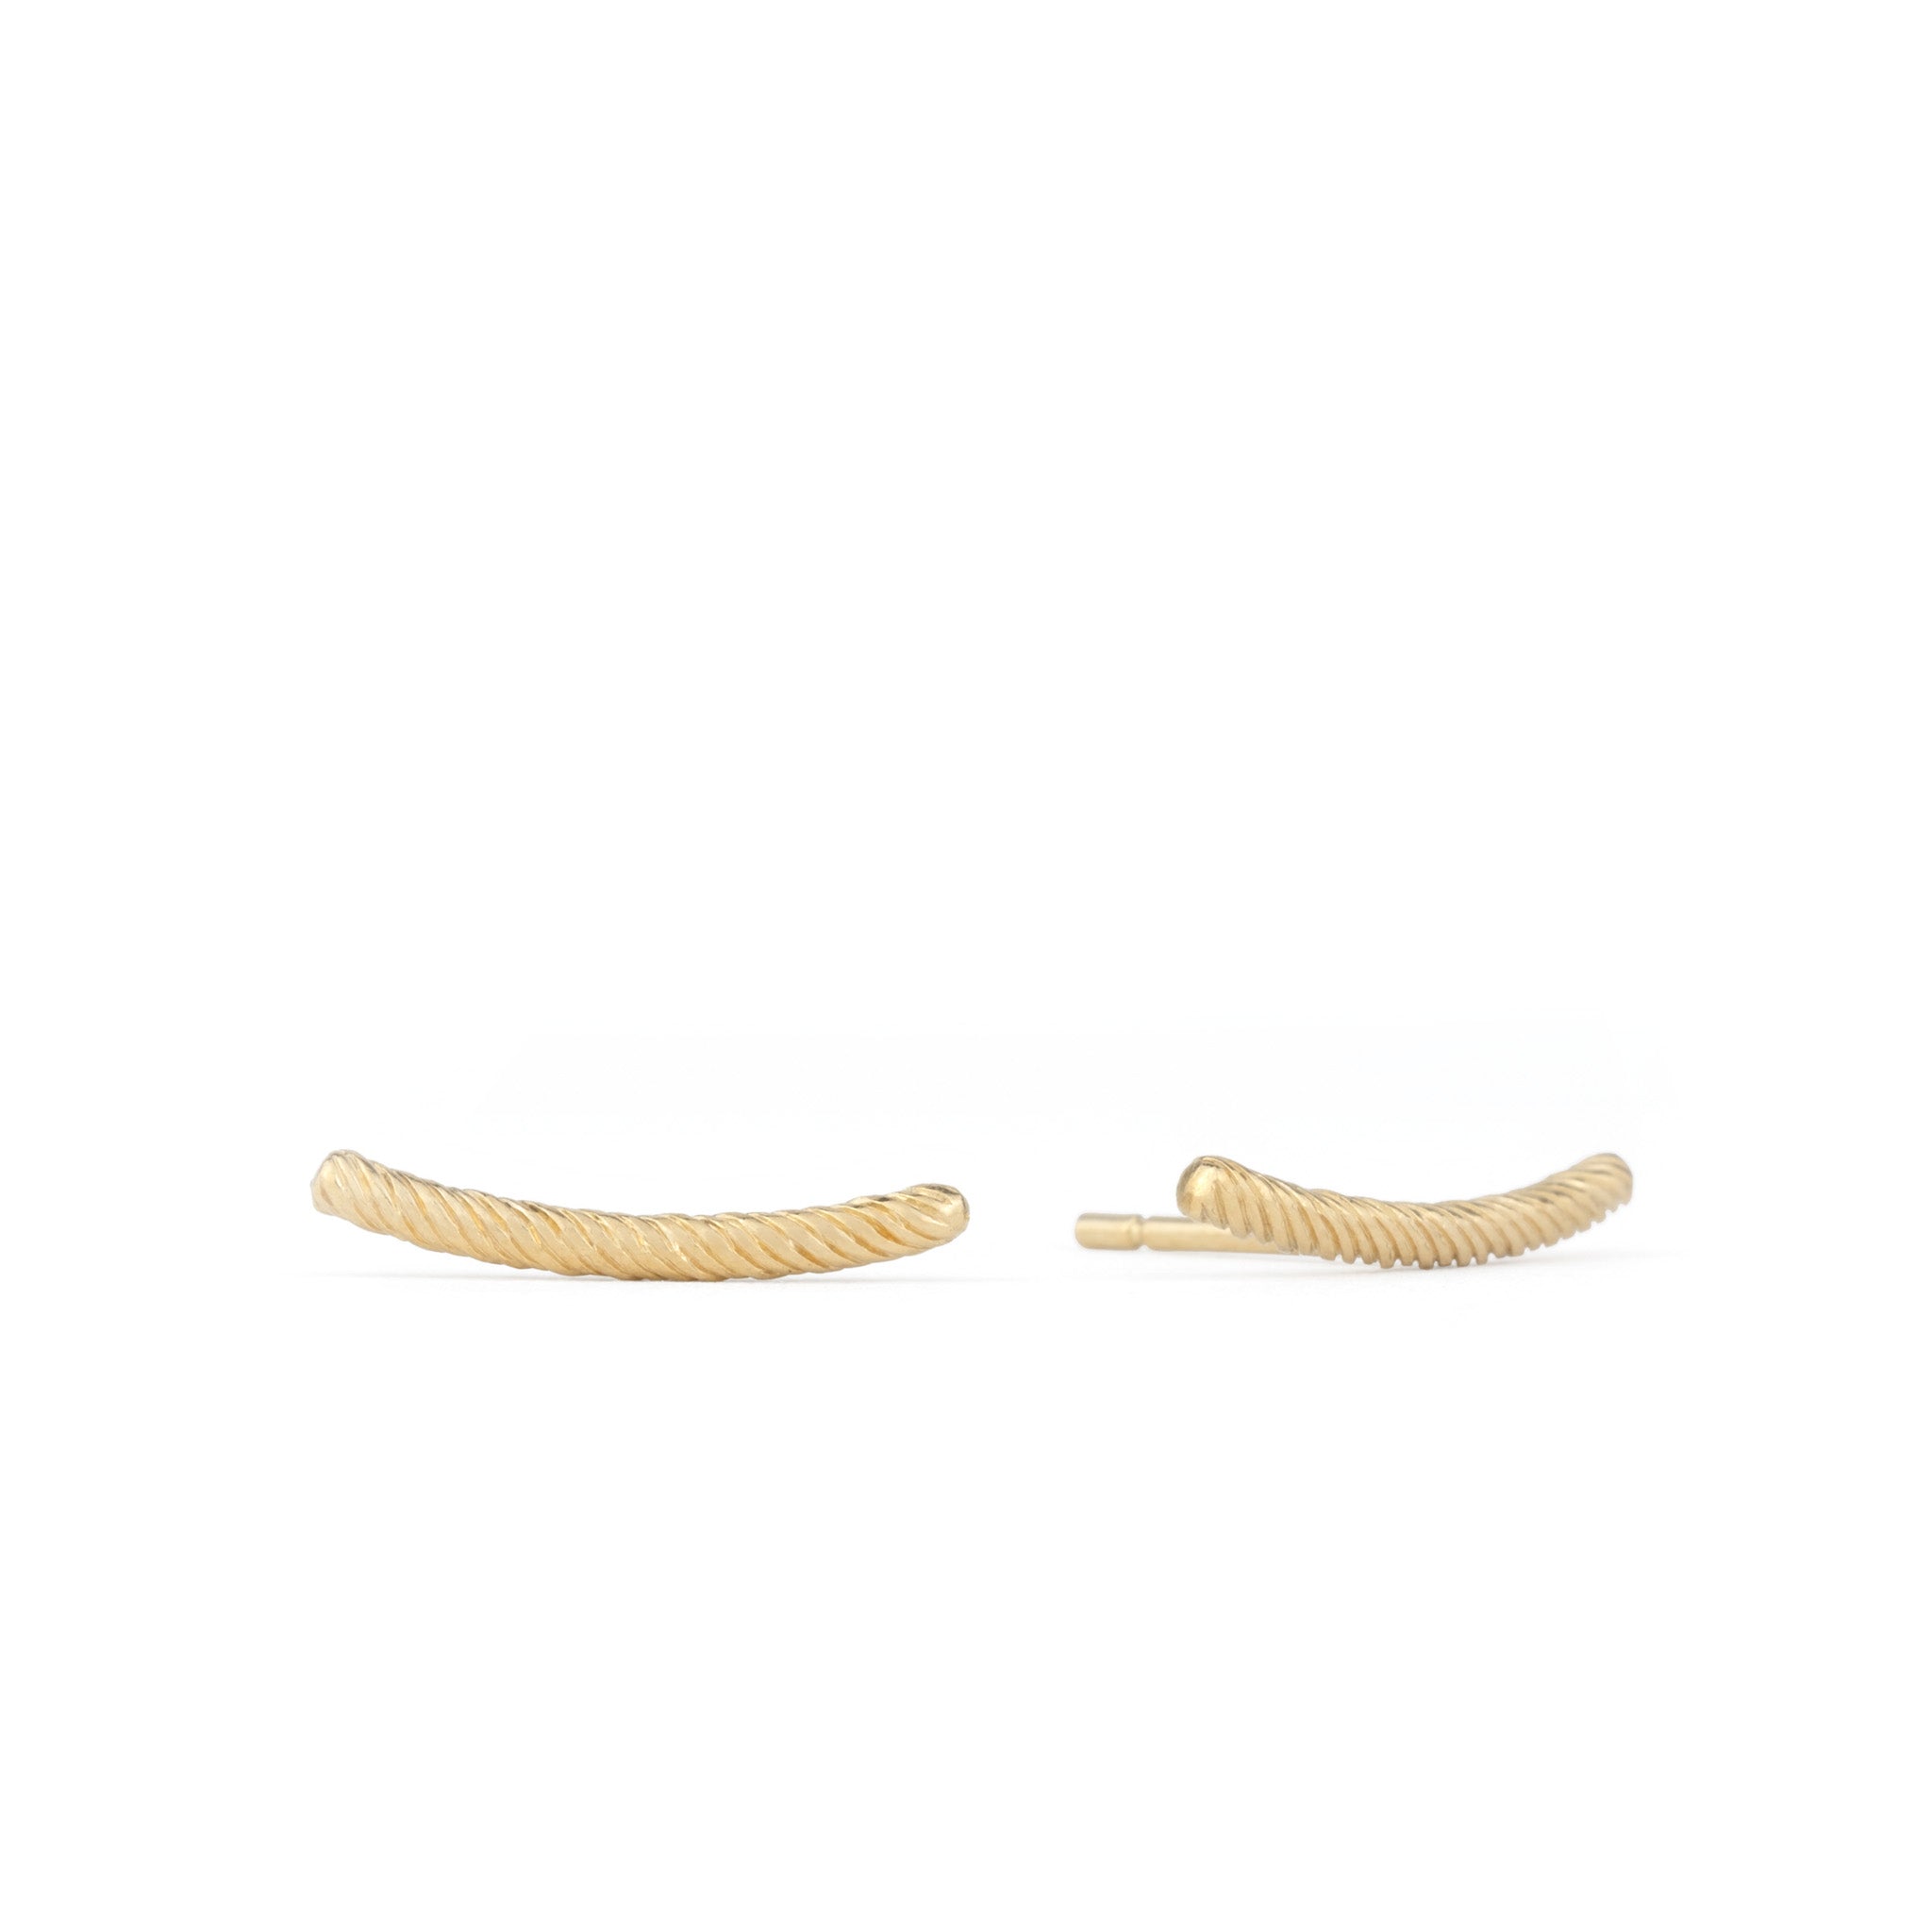 A pair of Aiden Jae Banyan Branch Studs on a white background.